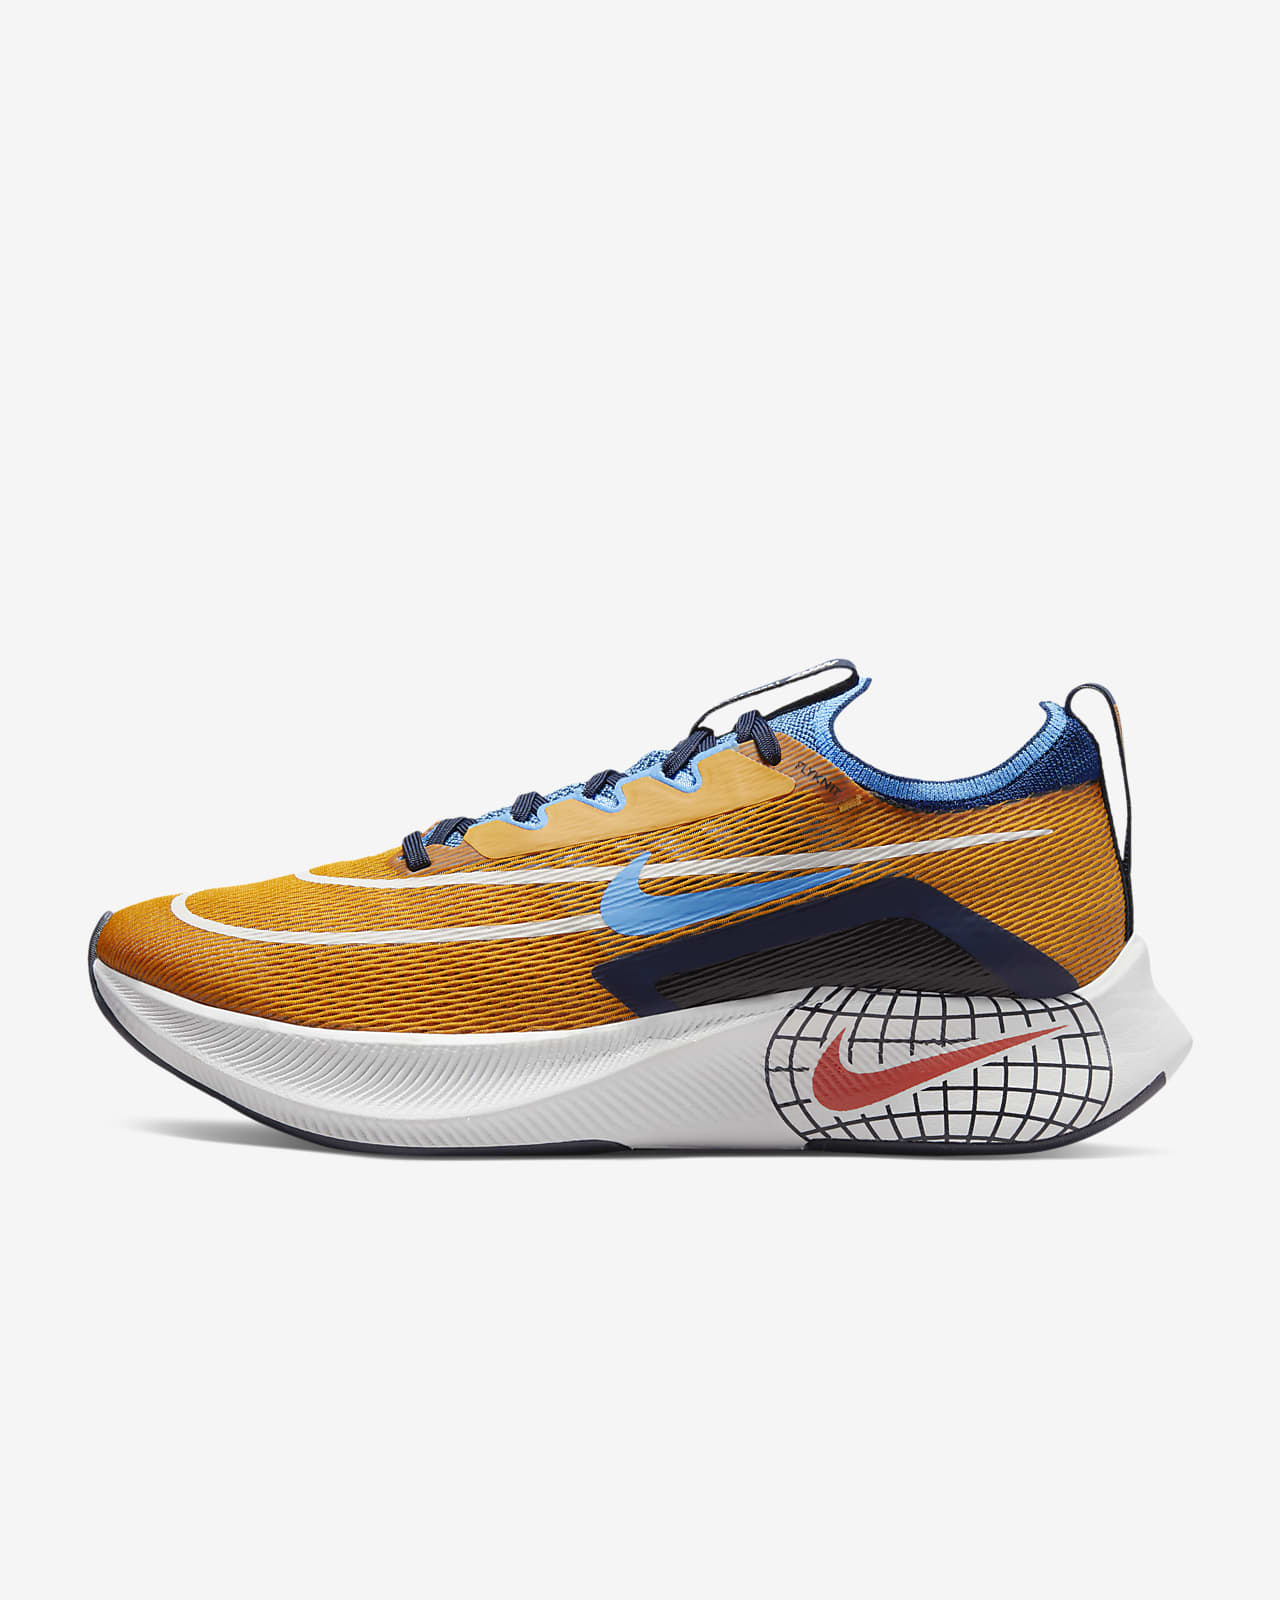 Nike Zoom Fly 4 Premium Road Running Shoes. Nike IL